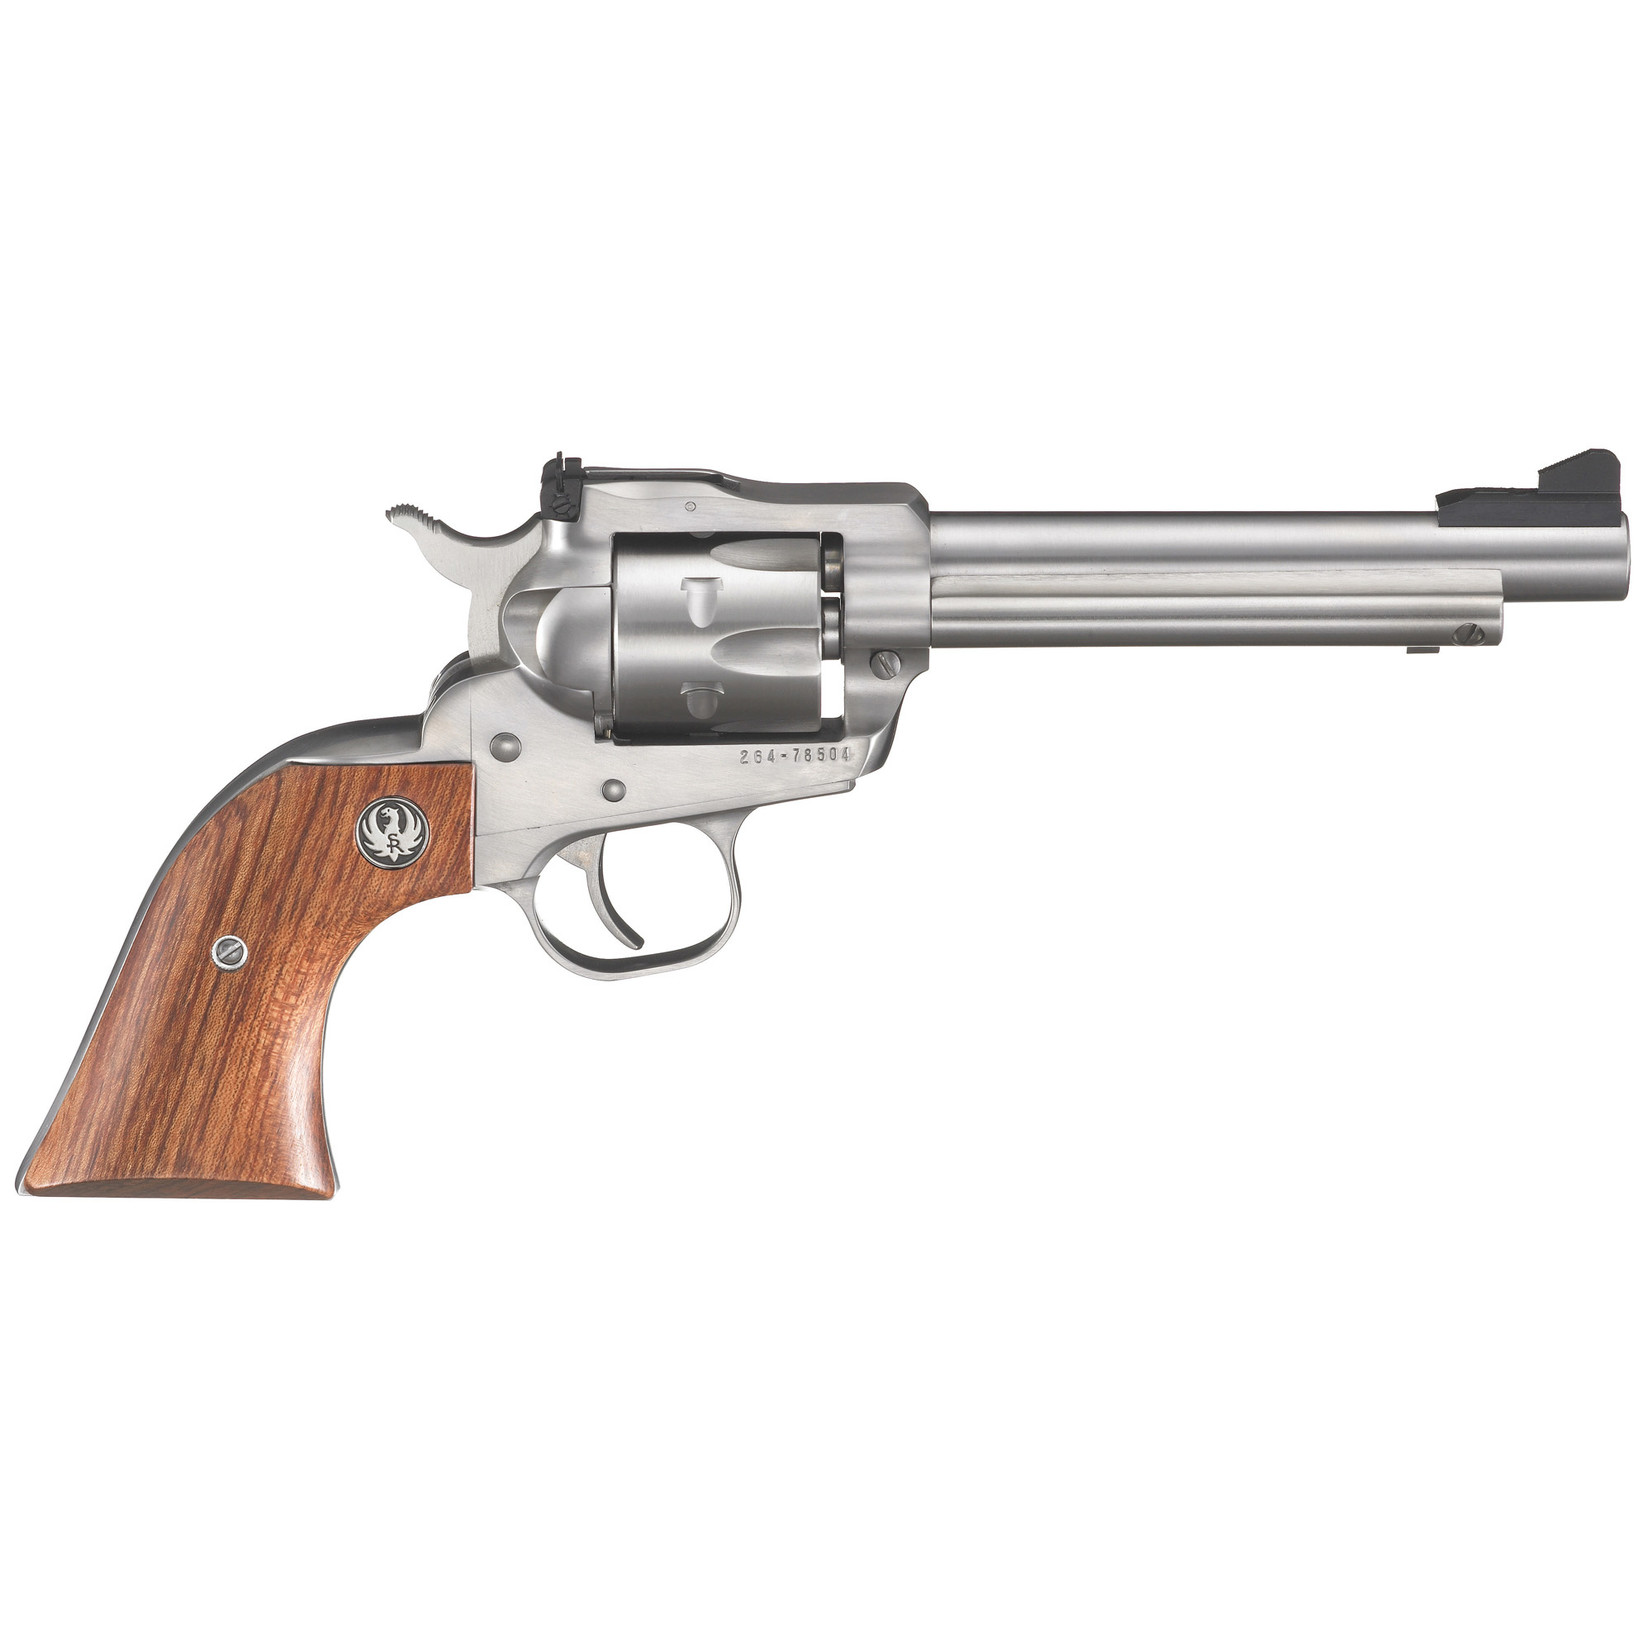 RUGER PRE-OWNED RUGER SINGLE-SIX CONVERTIBLE 22LR /22WMR 6RD 5.5" BBL SINGLE ACTION REVOLVER